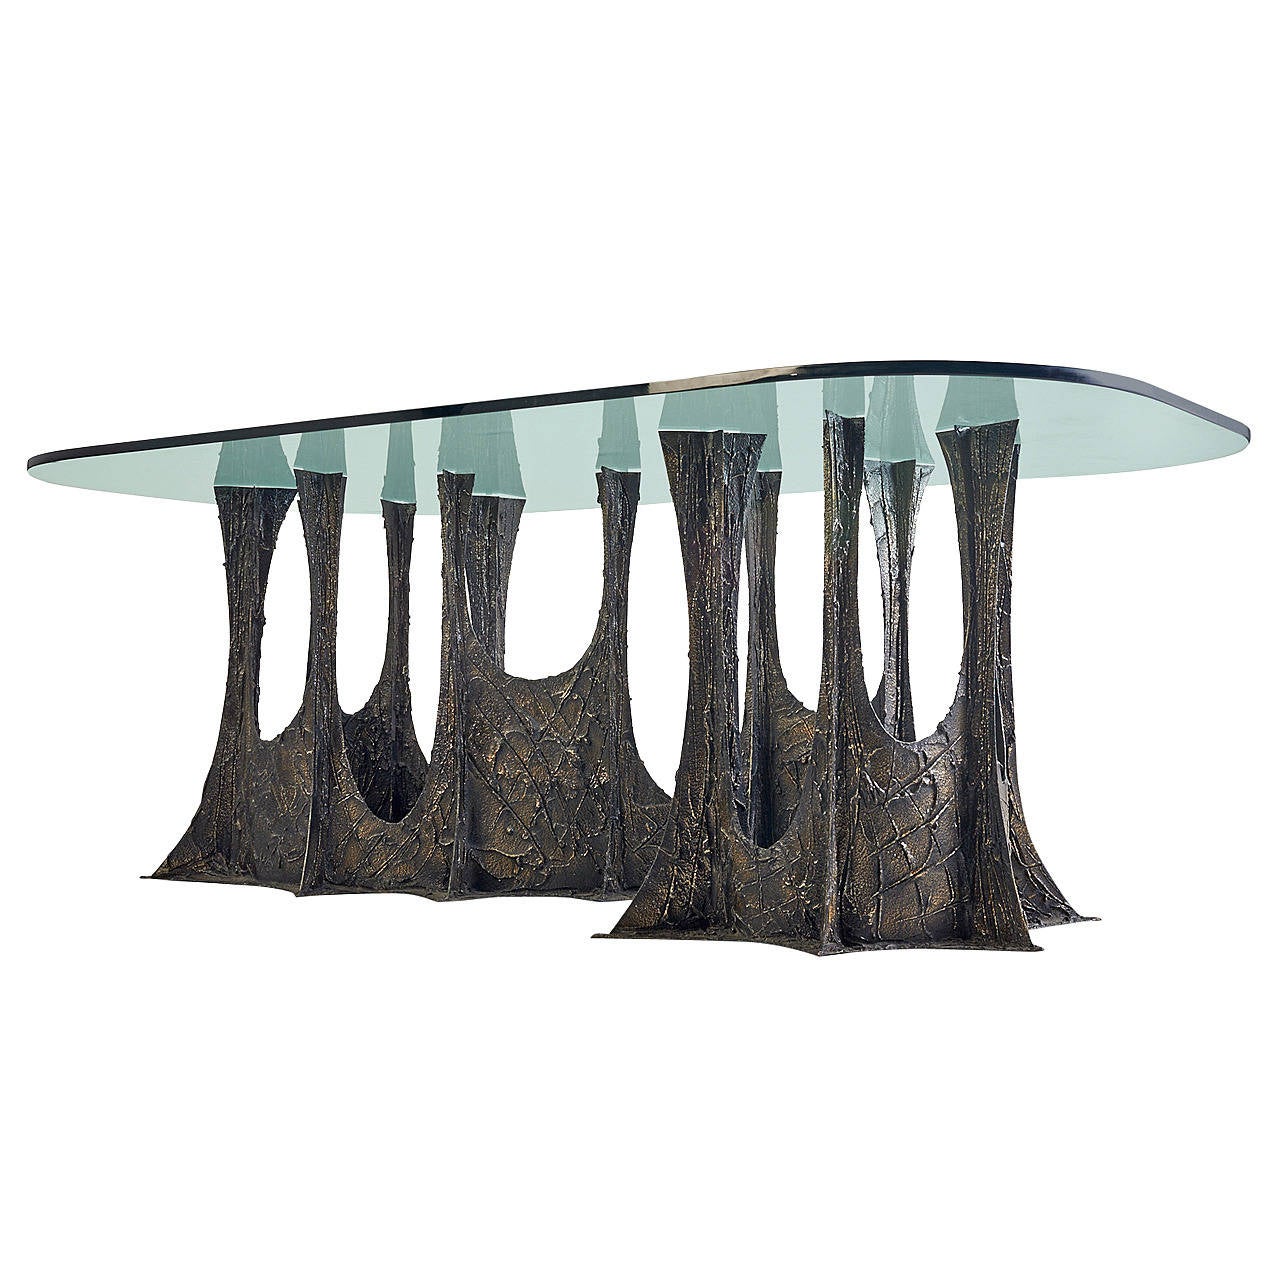 Paul Evans 1969 Stalagmite Signed Dining Table